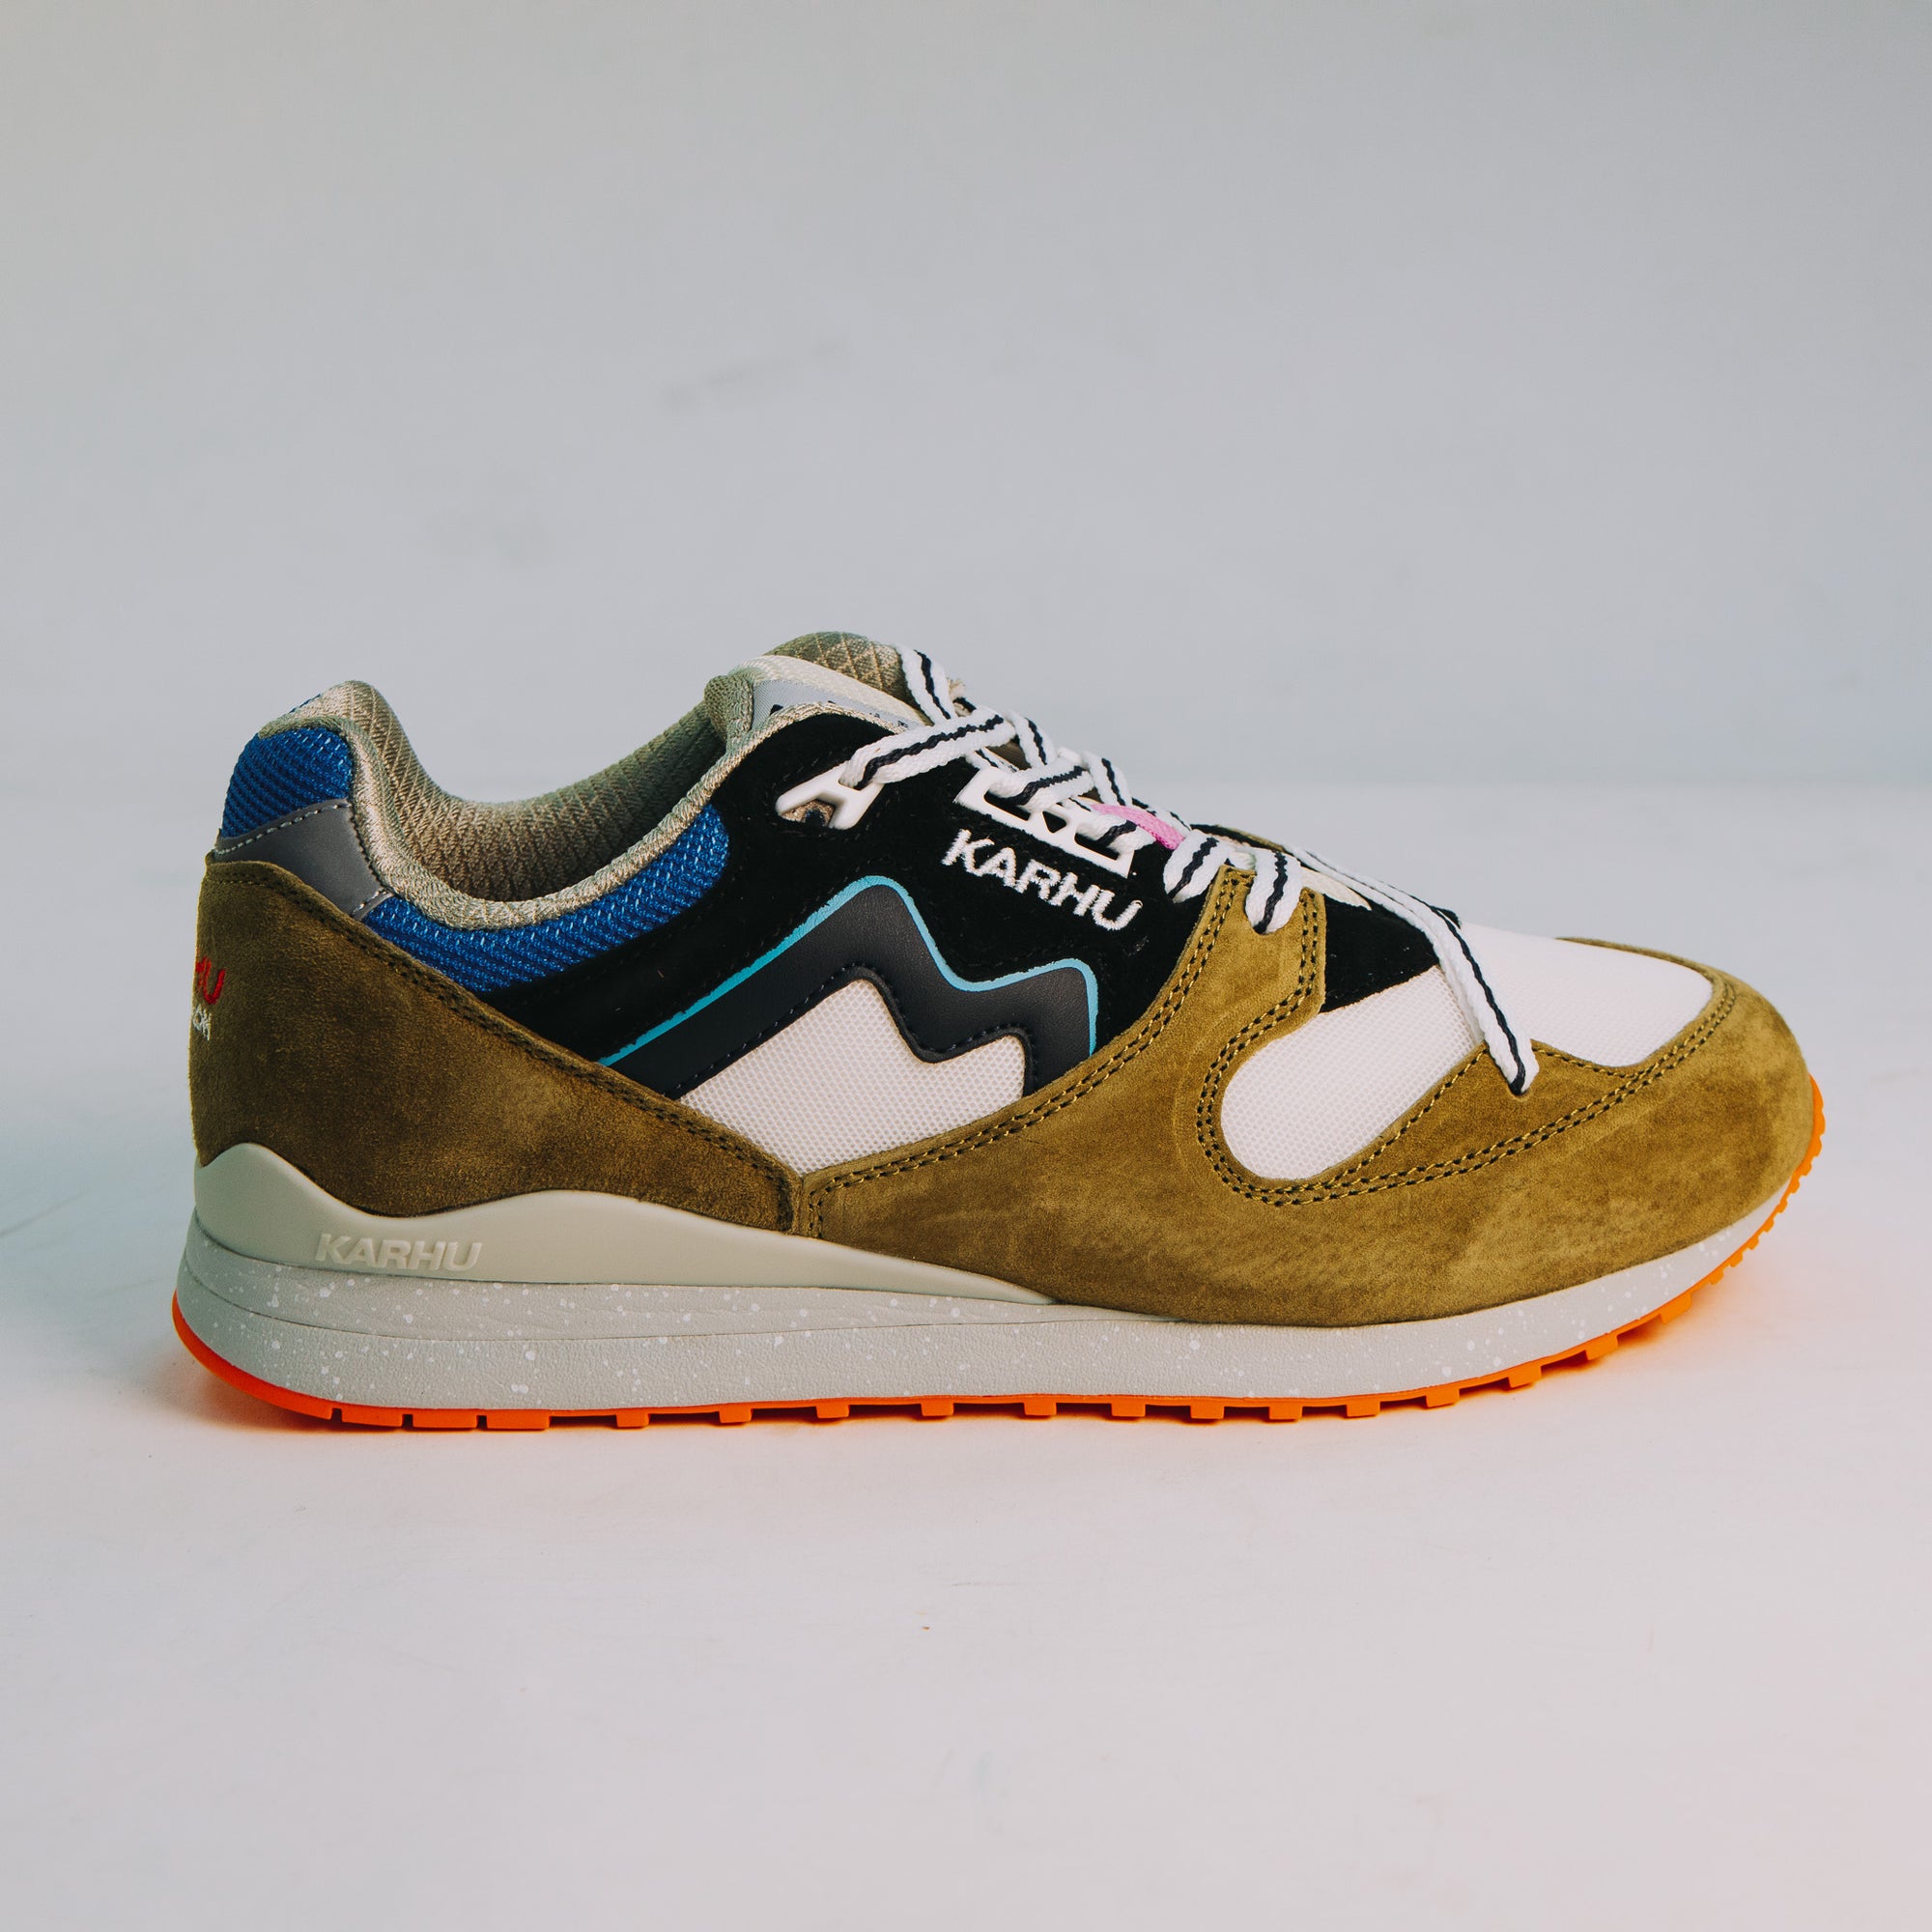 Karhu Aria 95 Trainers - Lily White / India Ink – The 5th Store